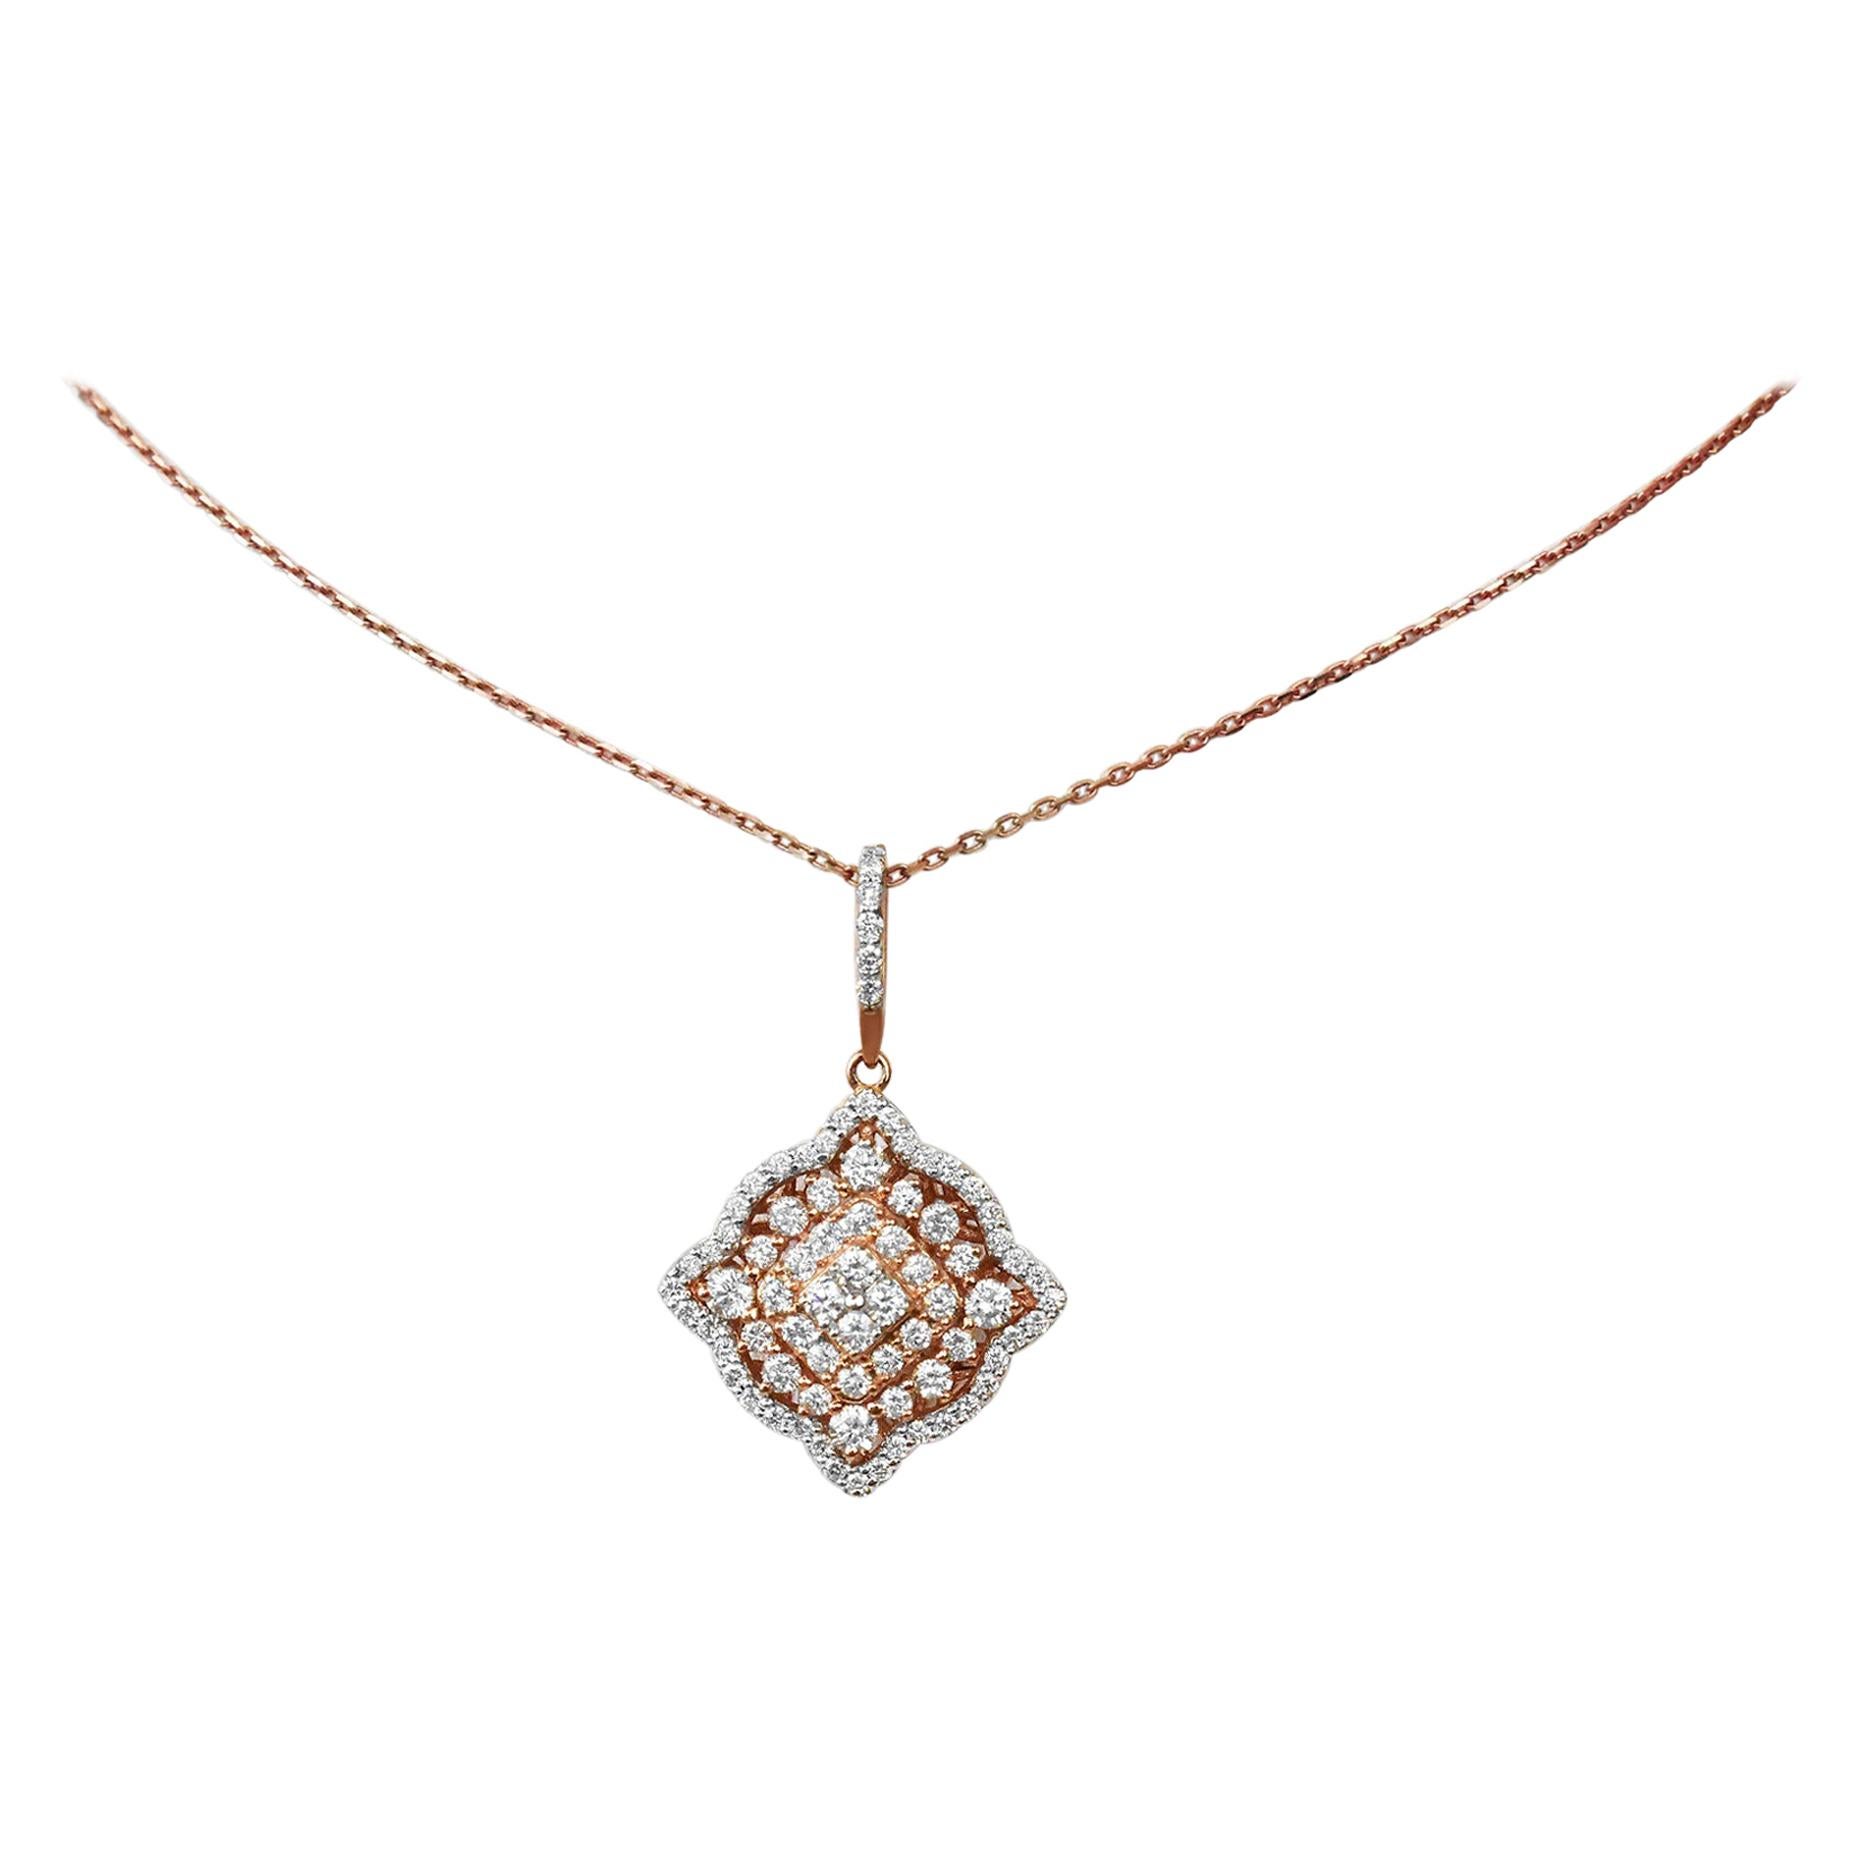 18Karat Gold Pendant Necklace Two-Tone White Gold Rose Gold Diamond Pave Fashion Pendant Necklace
             A fashion Art Nouveau pendant necklace is fully paved with brilliant-cut diamonds set in stunning 18K 2 tone gold, Rose gold/white gold.